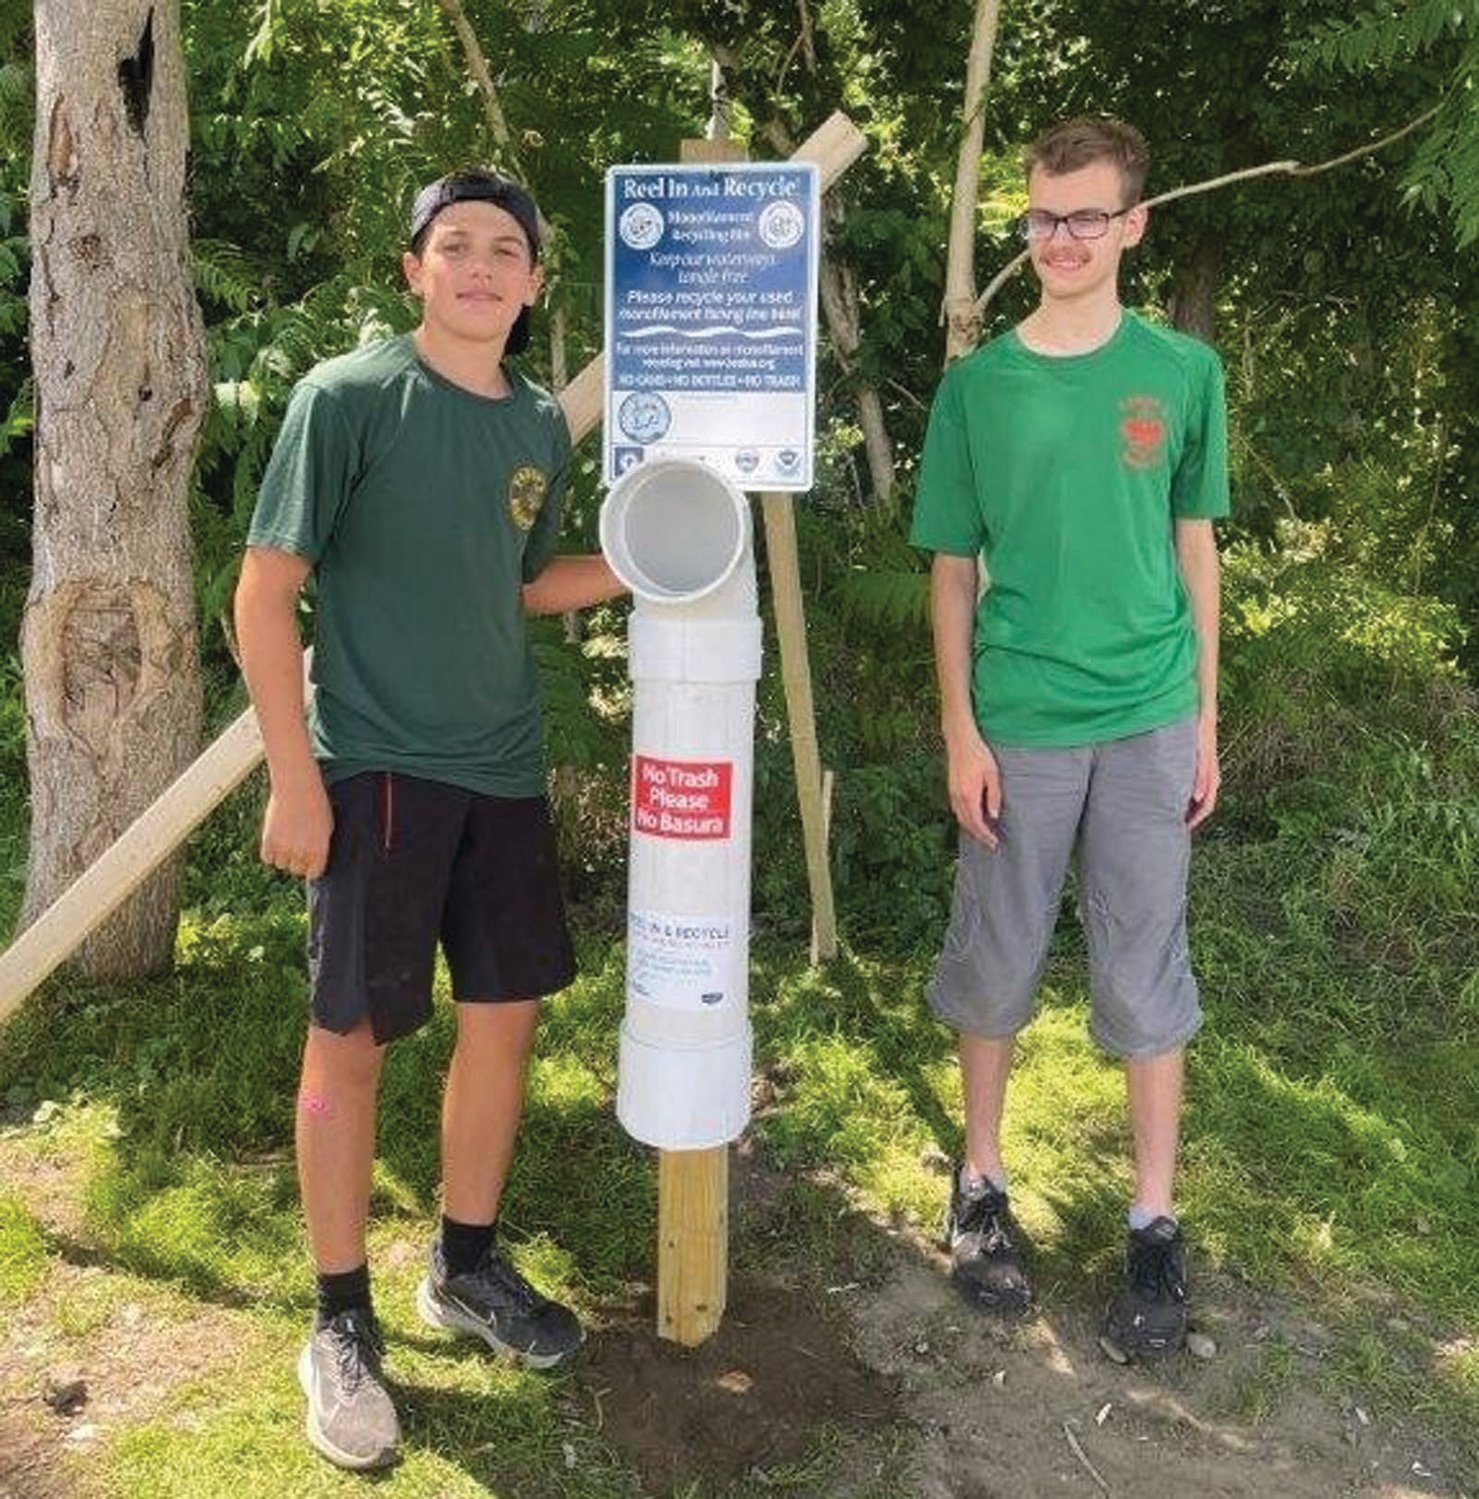 EAGLE SCOUT: Nathan Simas of Bristol with friend Nathan Dieterich. Simas built five fishing line receptacles as part of his Eagle Scout journey.